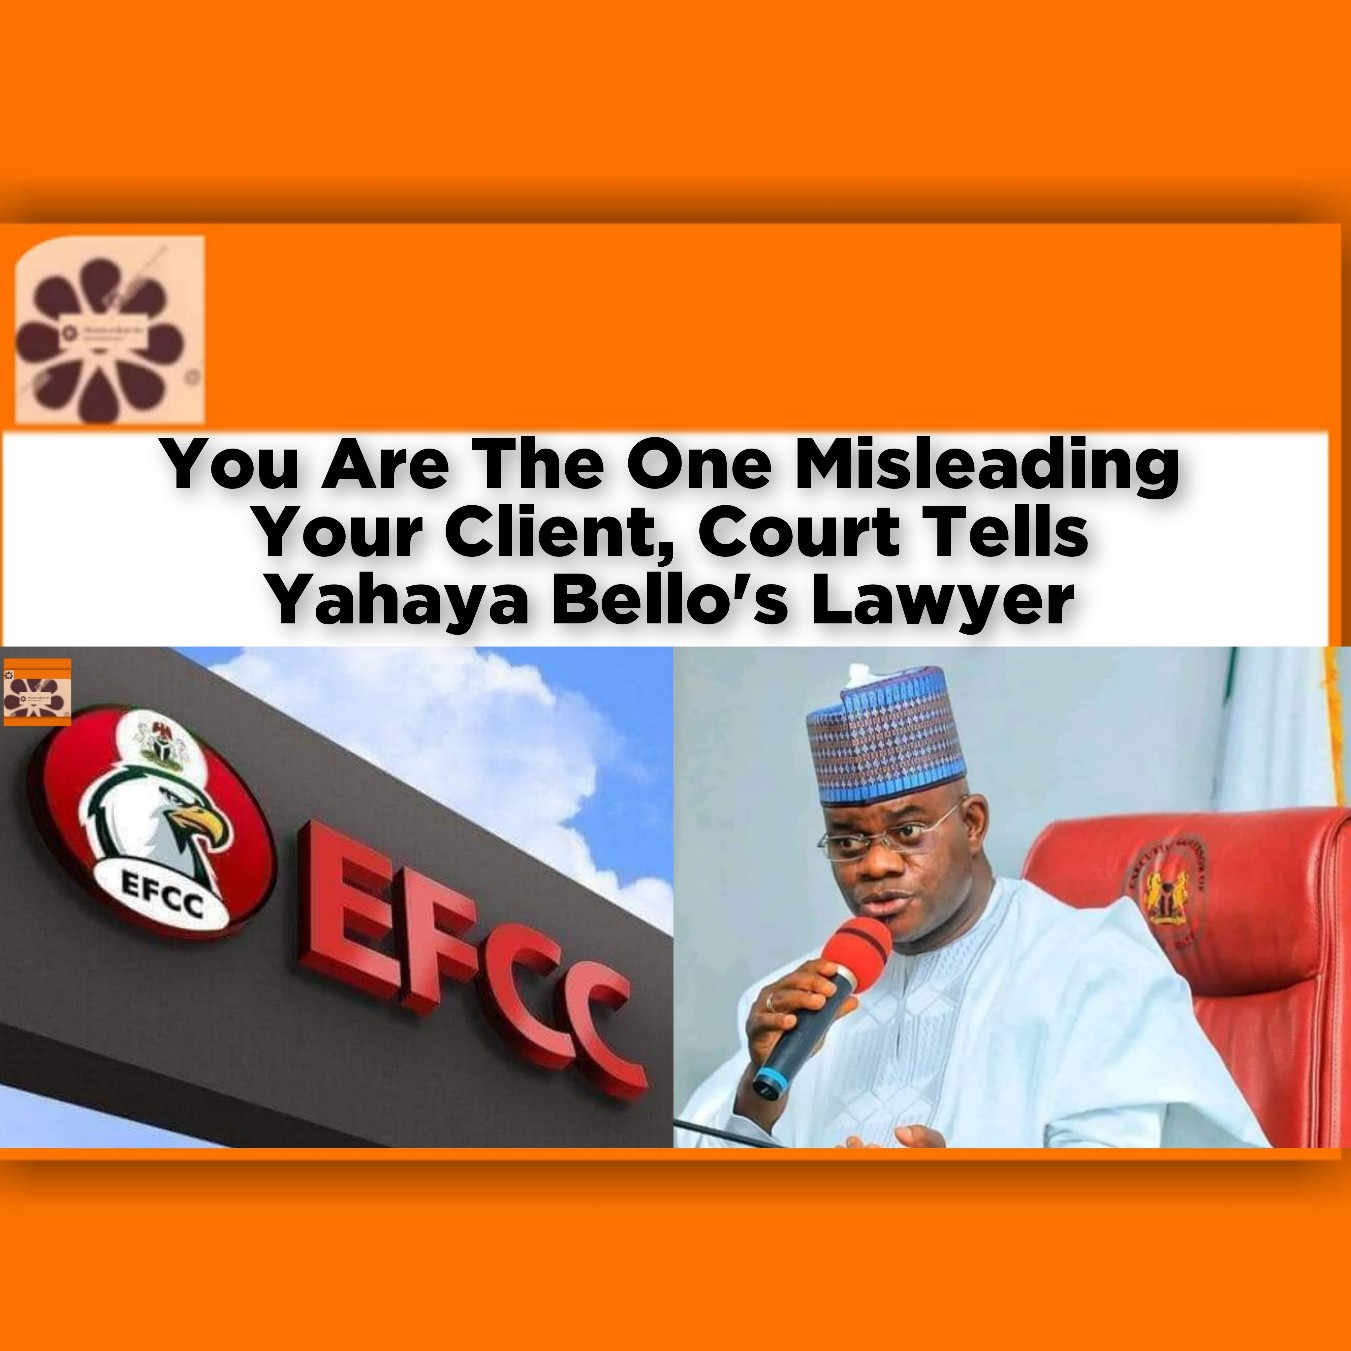 You Are The One Misleading Your Client, Court Tells Yahaya Bello's Lawyer ~ OsazuwaAkonedo #PEPC